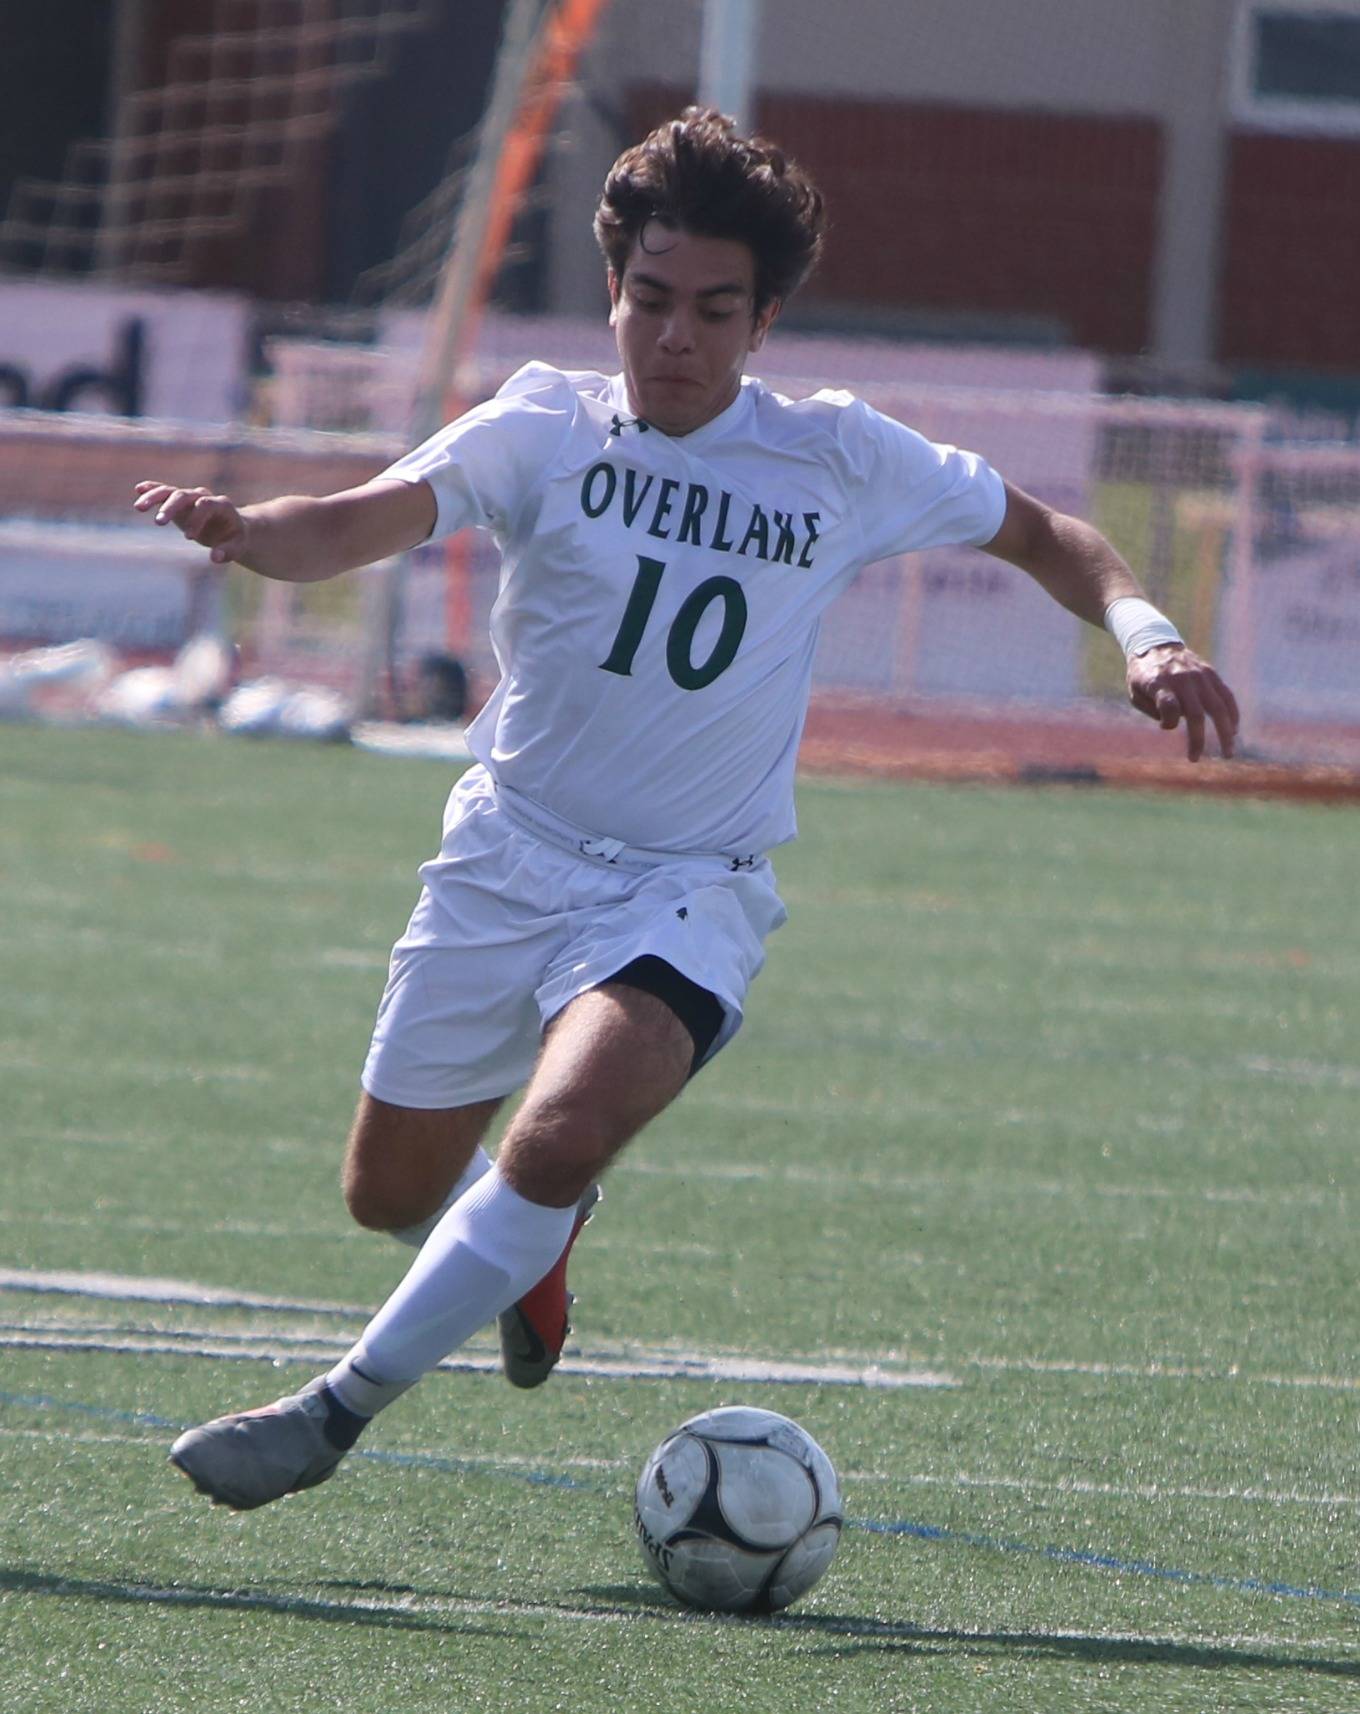 Overlake’s Esteban Sanchez swiftly moves the ball up field against Winlock/Toledo on May 24. Andy Nystrom /staff photo